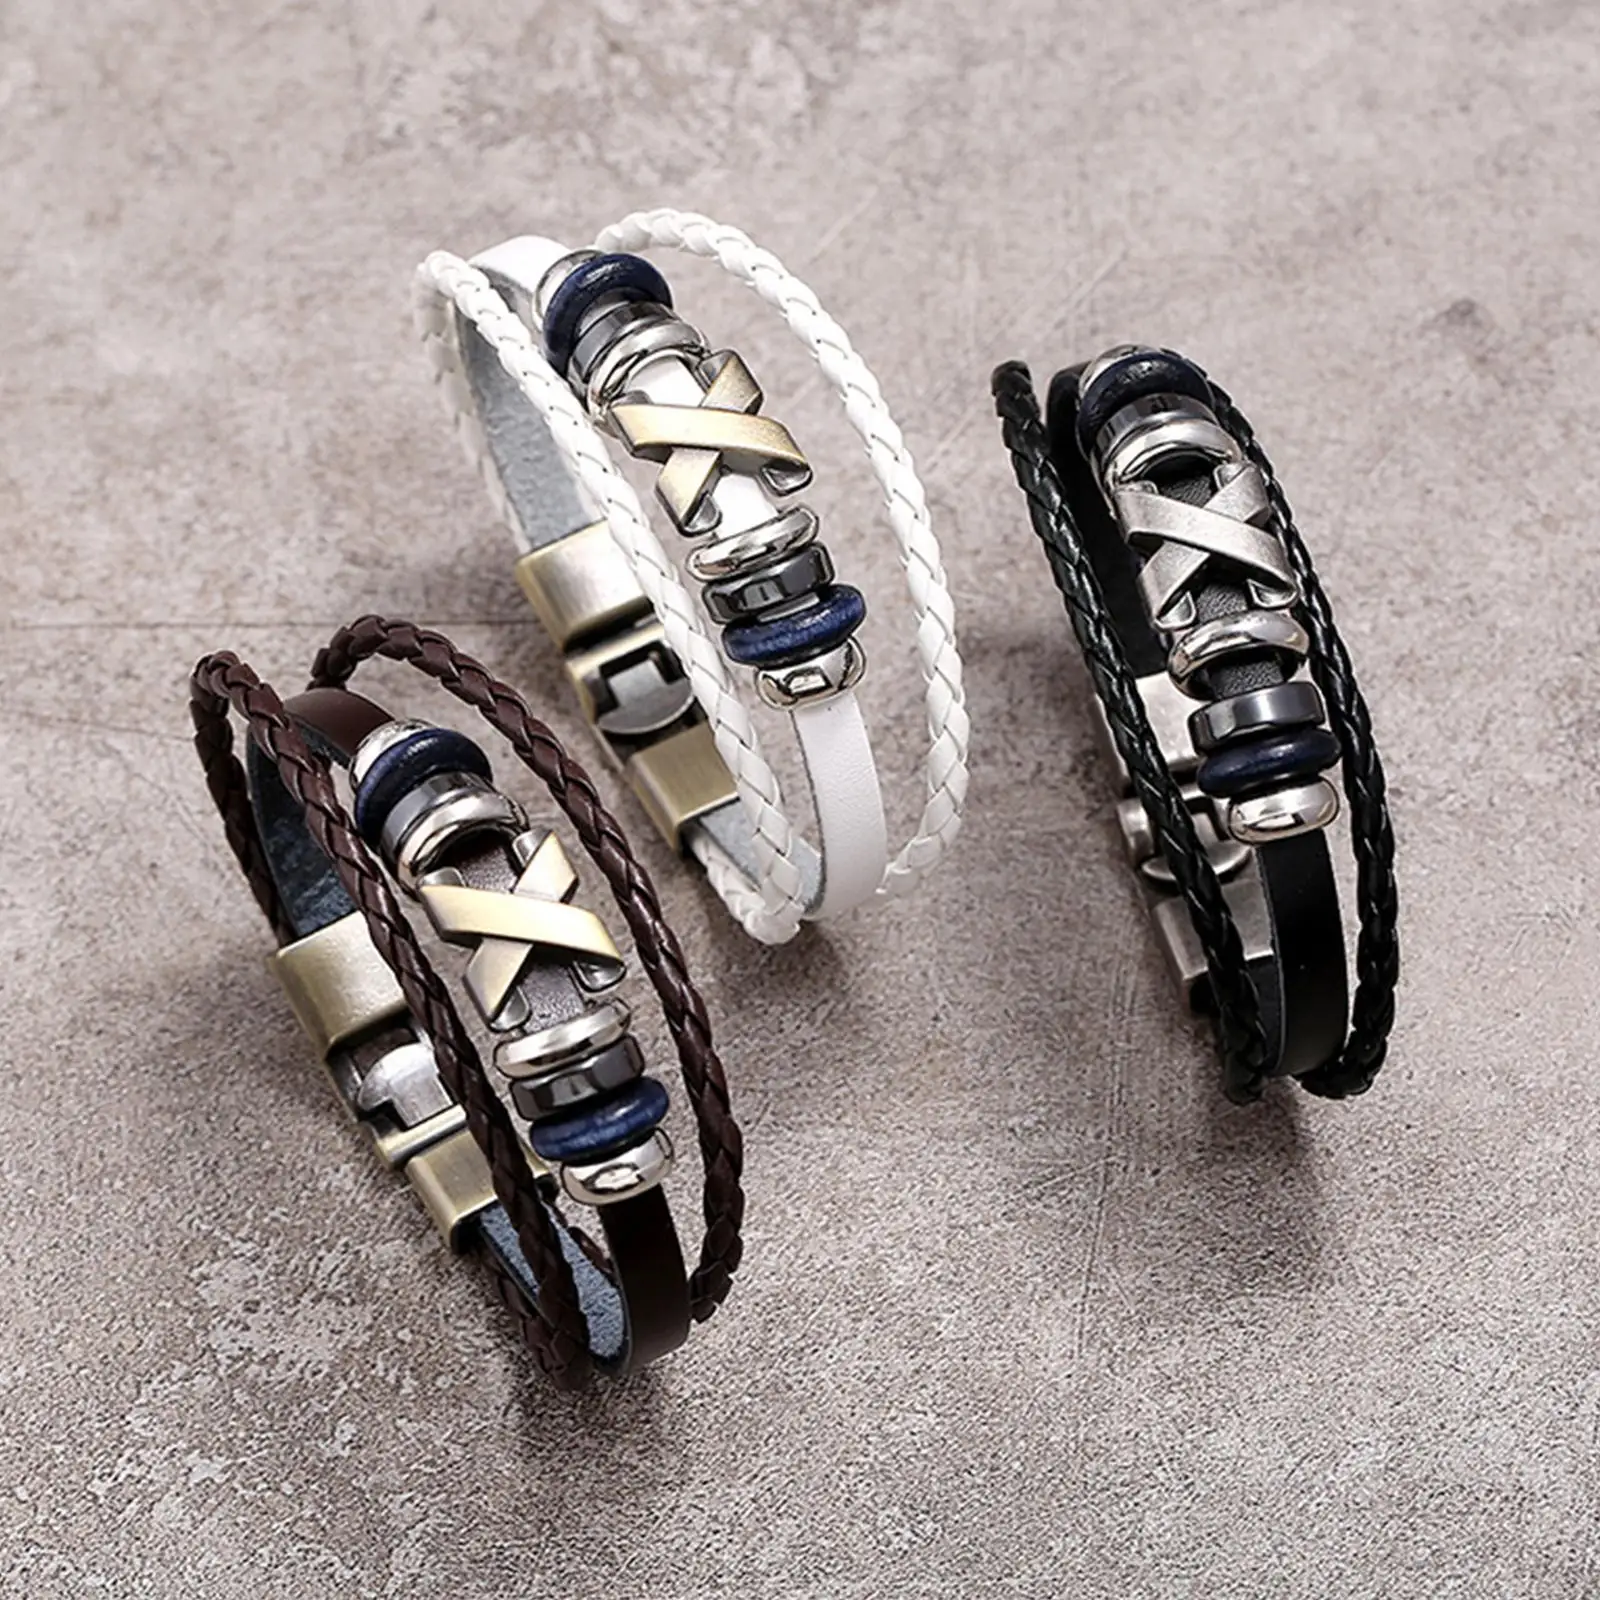 Braided Leather Bracelet Wrist Cuff Bangle Beads Charms with Alloy Closure